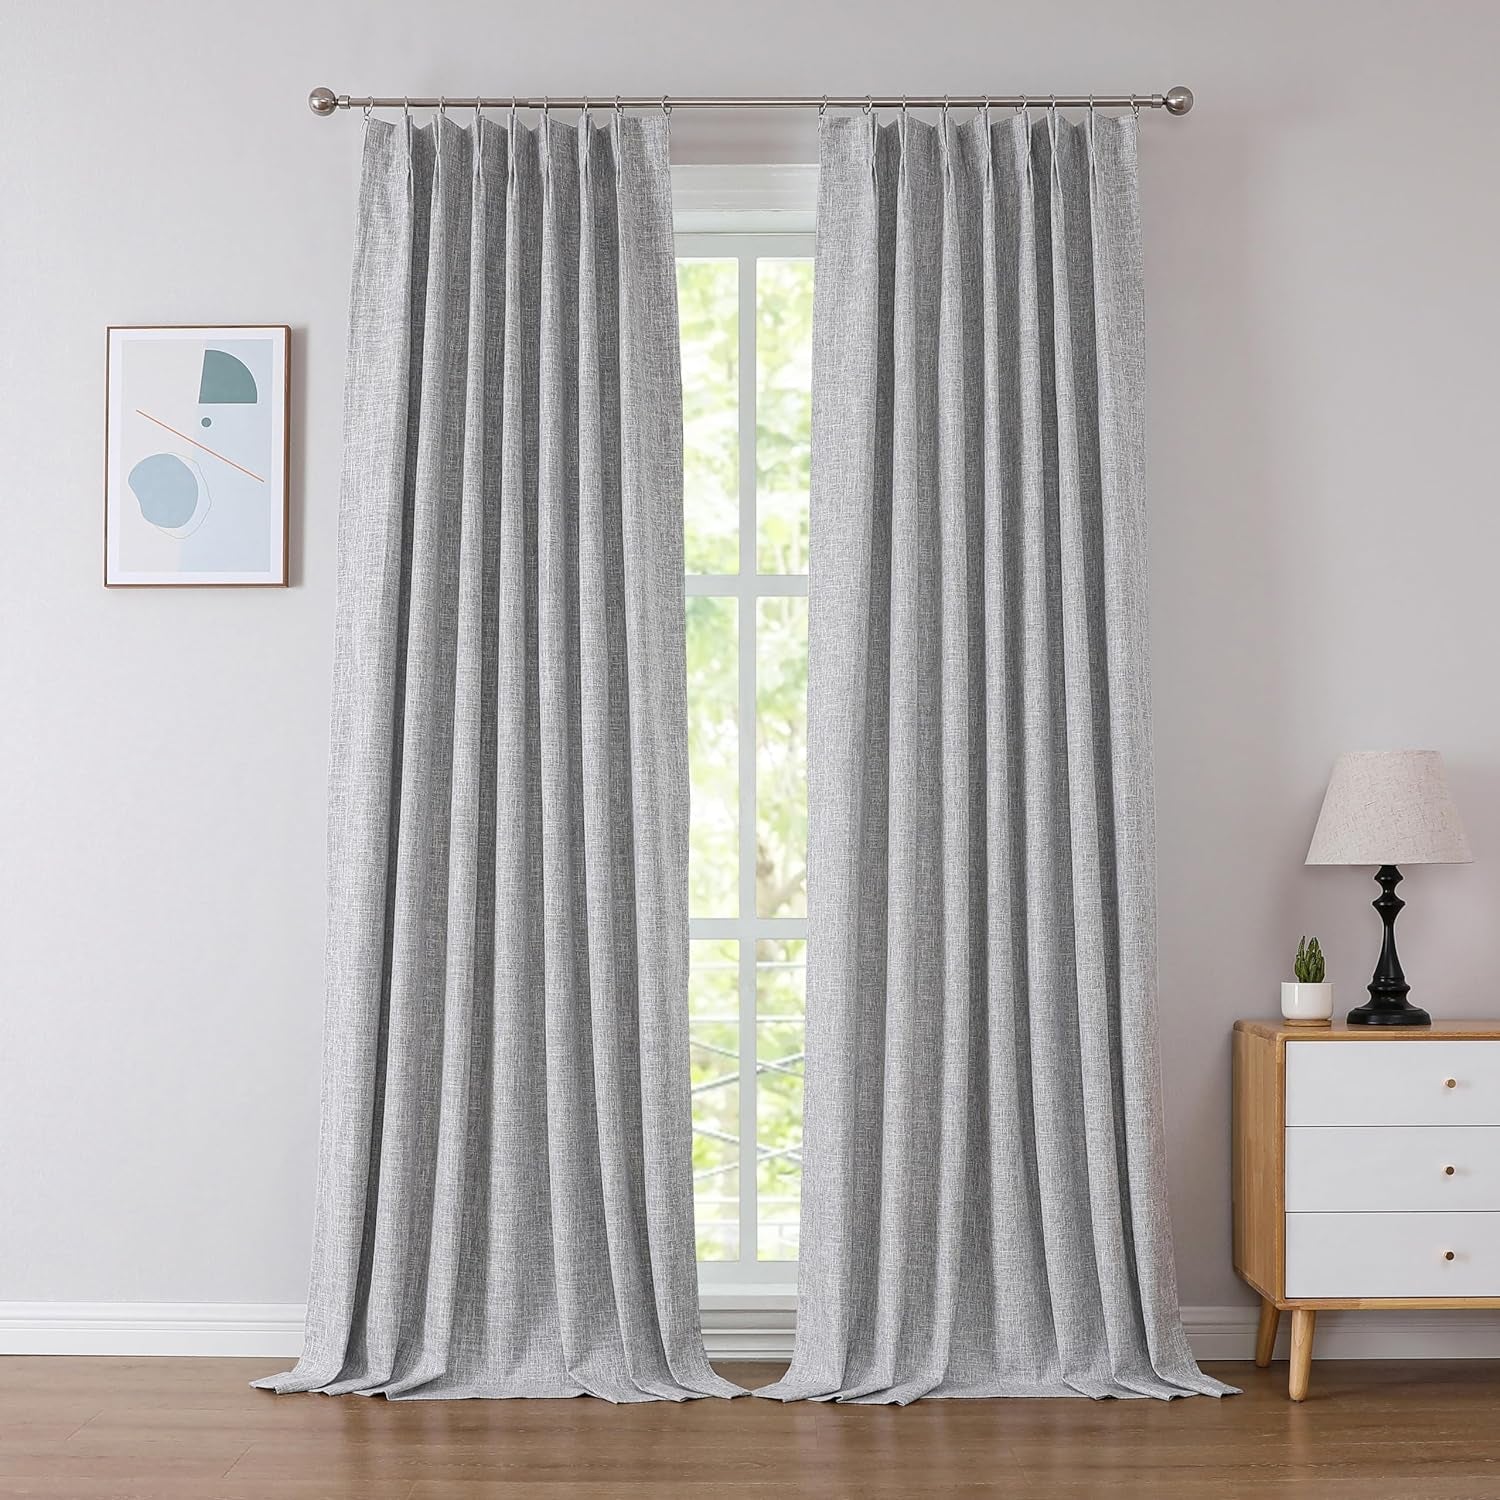 Kayne Studio Nature Blended Linen Pinch Pleat Blackout Curtains 84 Inch Long for Living Room Bedroom,Thermal Insulated Window Treatments Pleated Drapes for Track with 9 Hooks,40"X84",Beige,1 Panel  Kayne Studio   